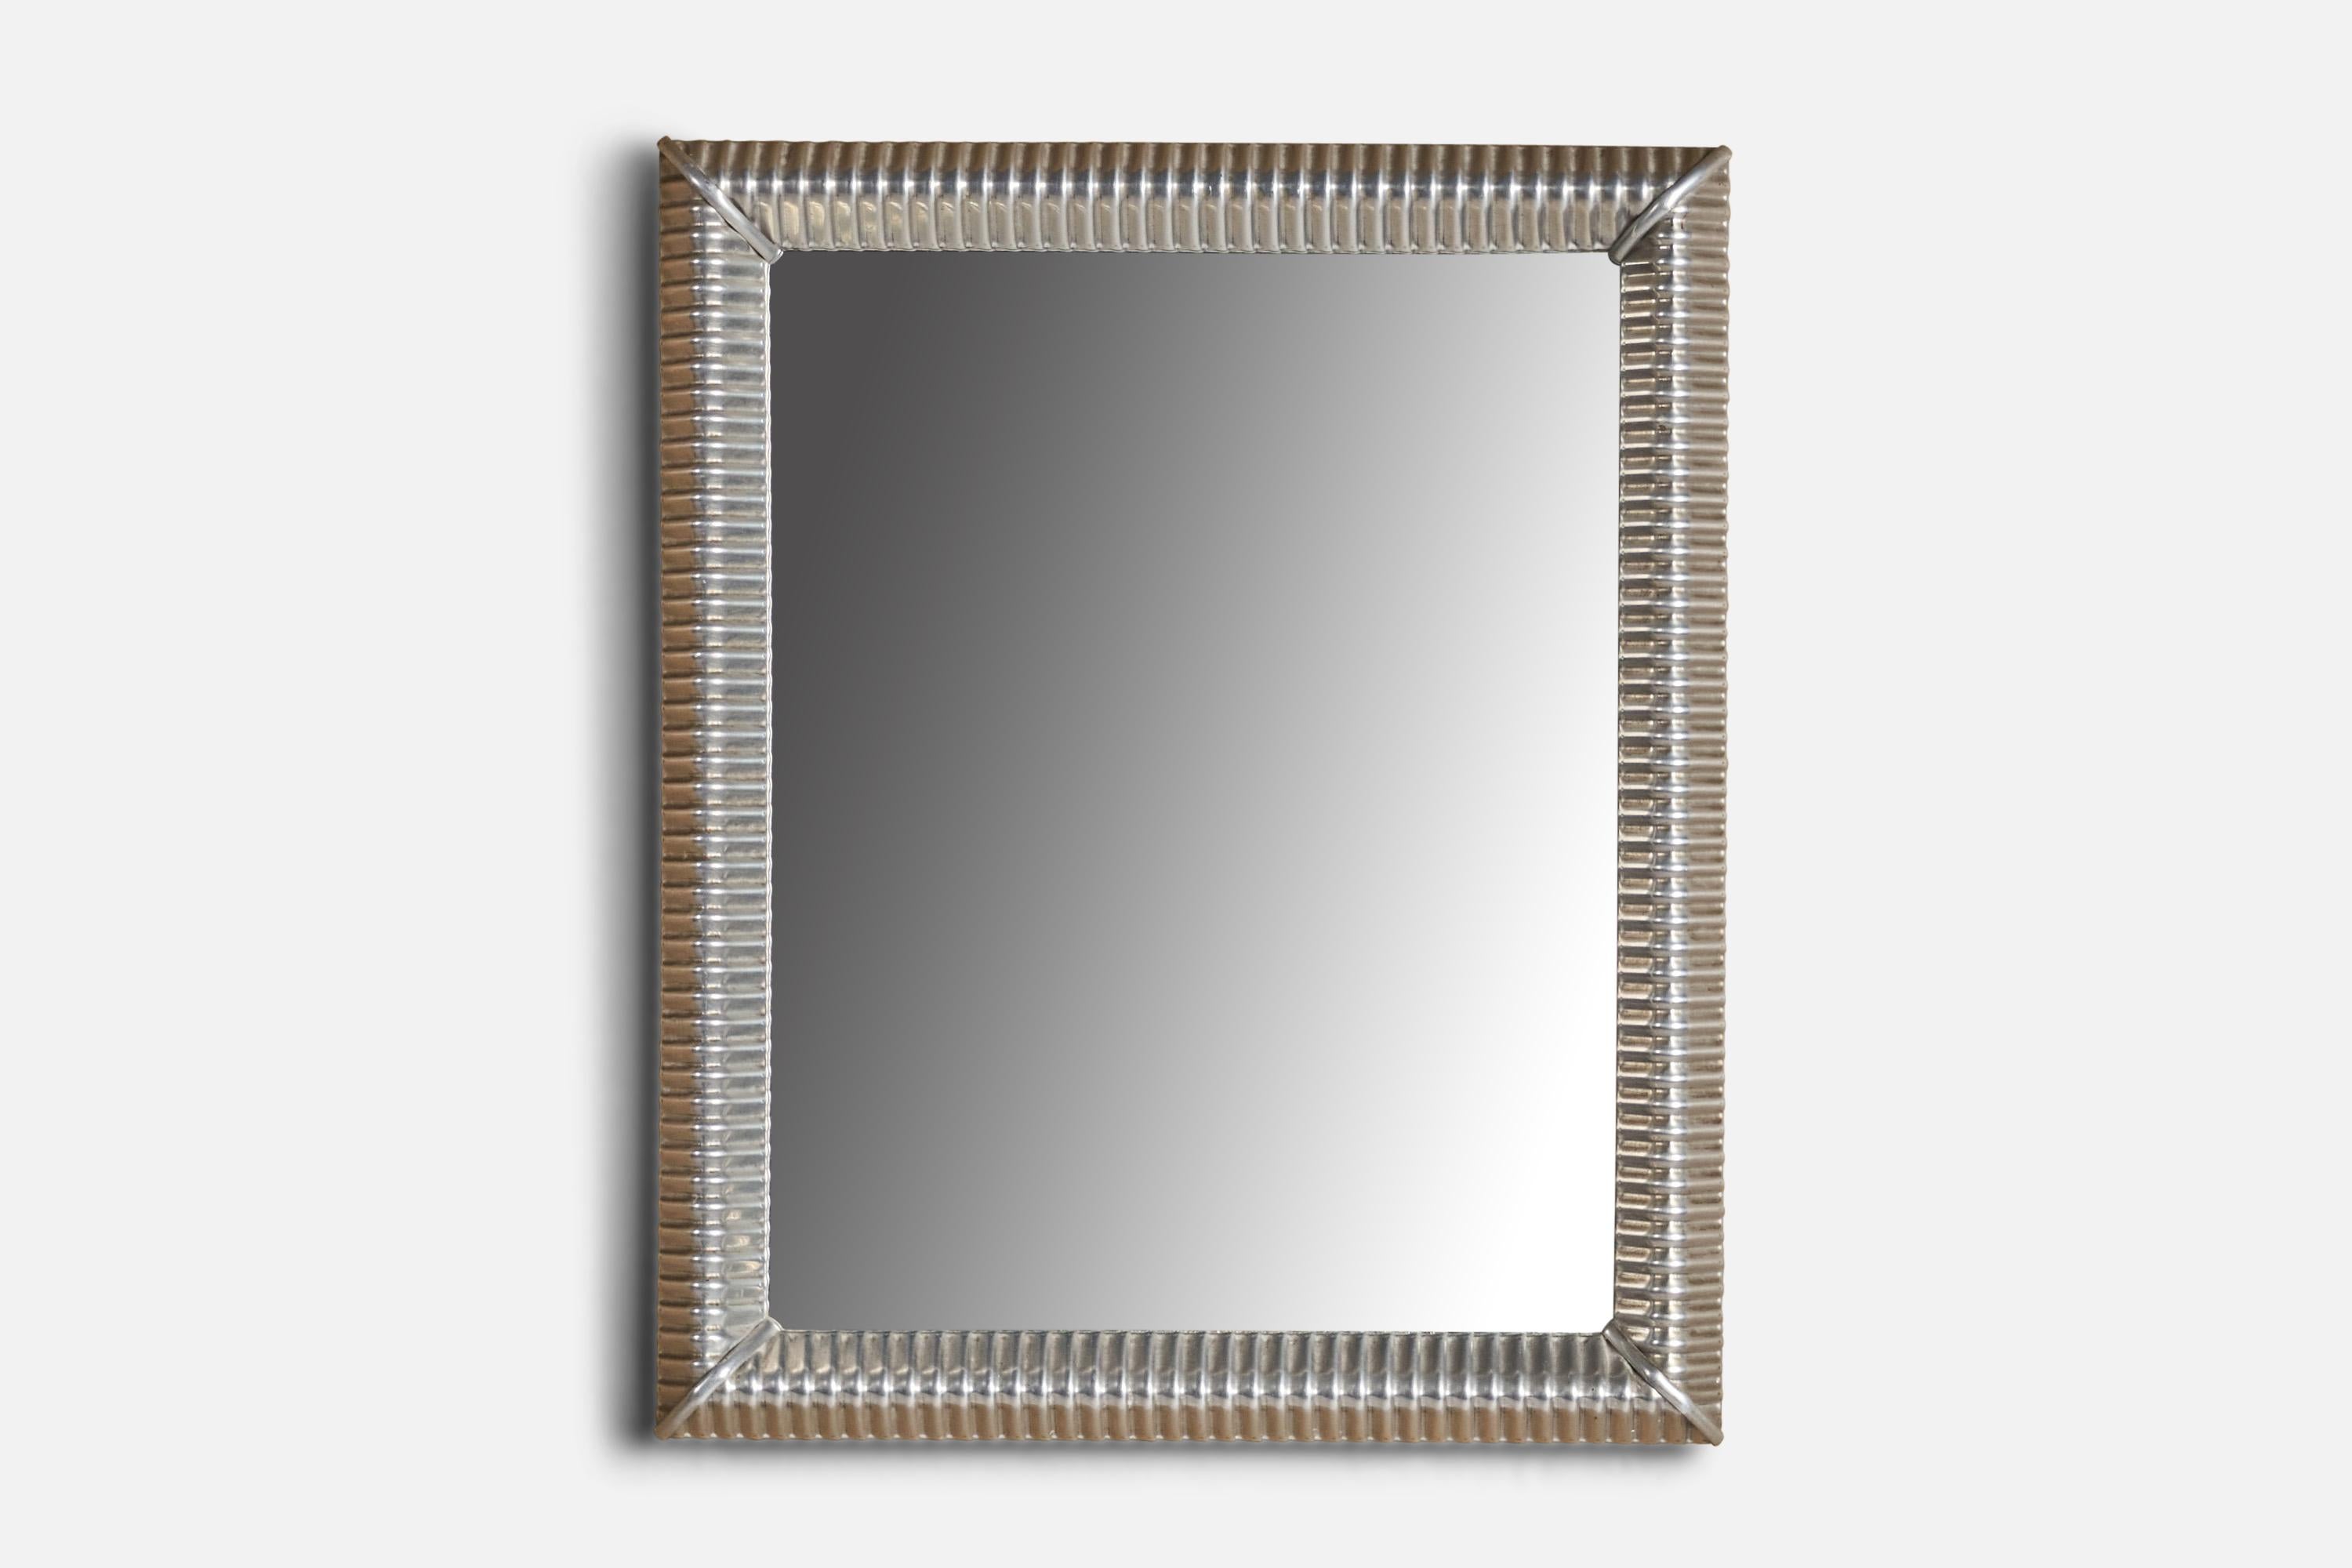 An aluminium wall mirror designed and produced in Italy, c. 1940s.